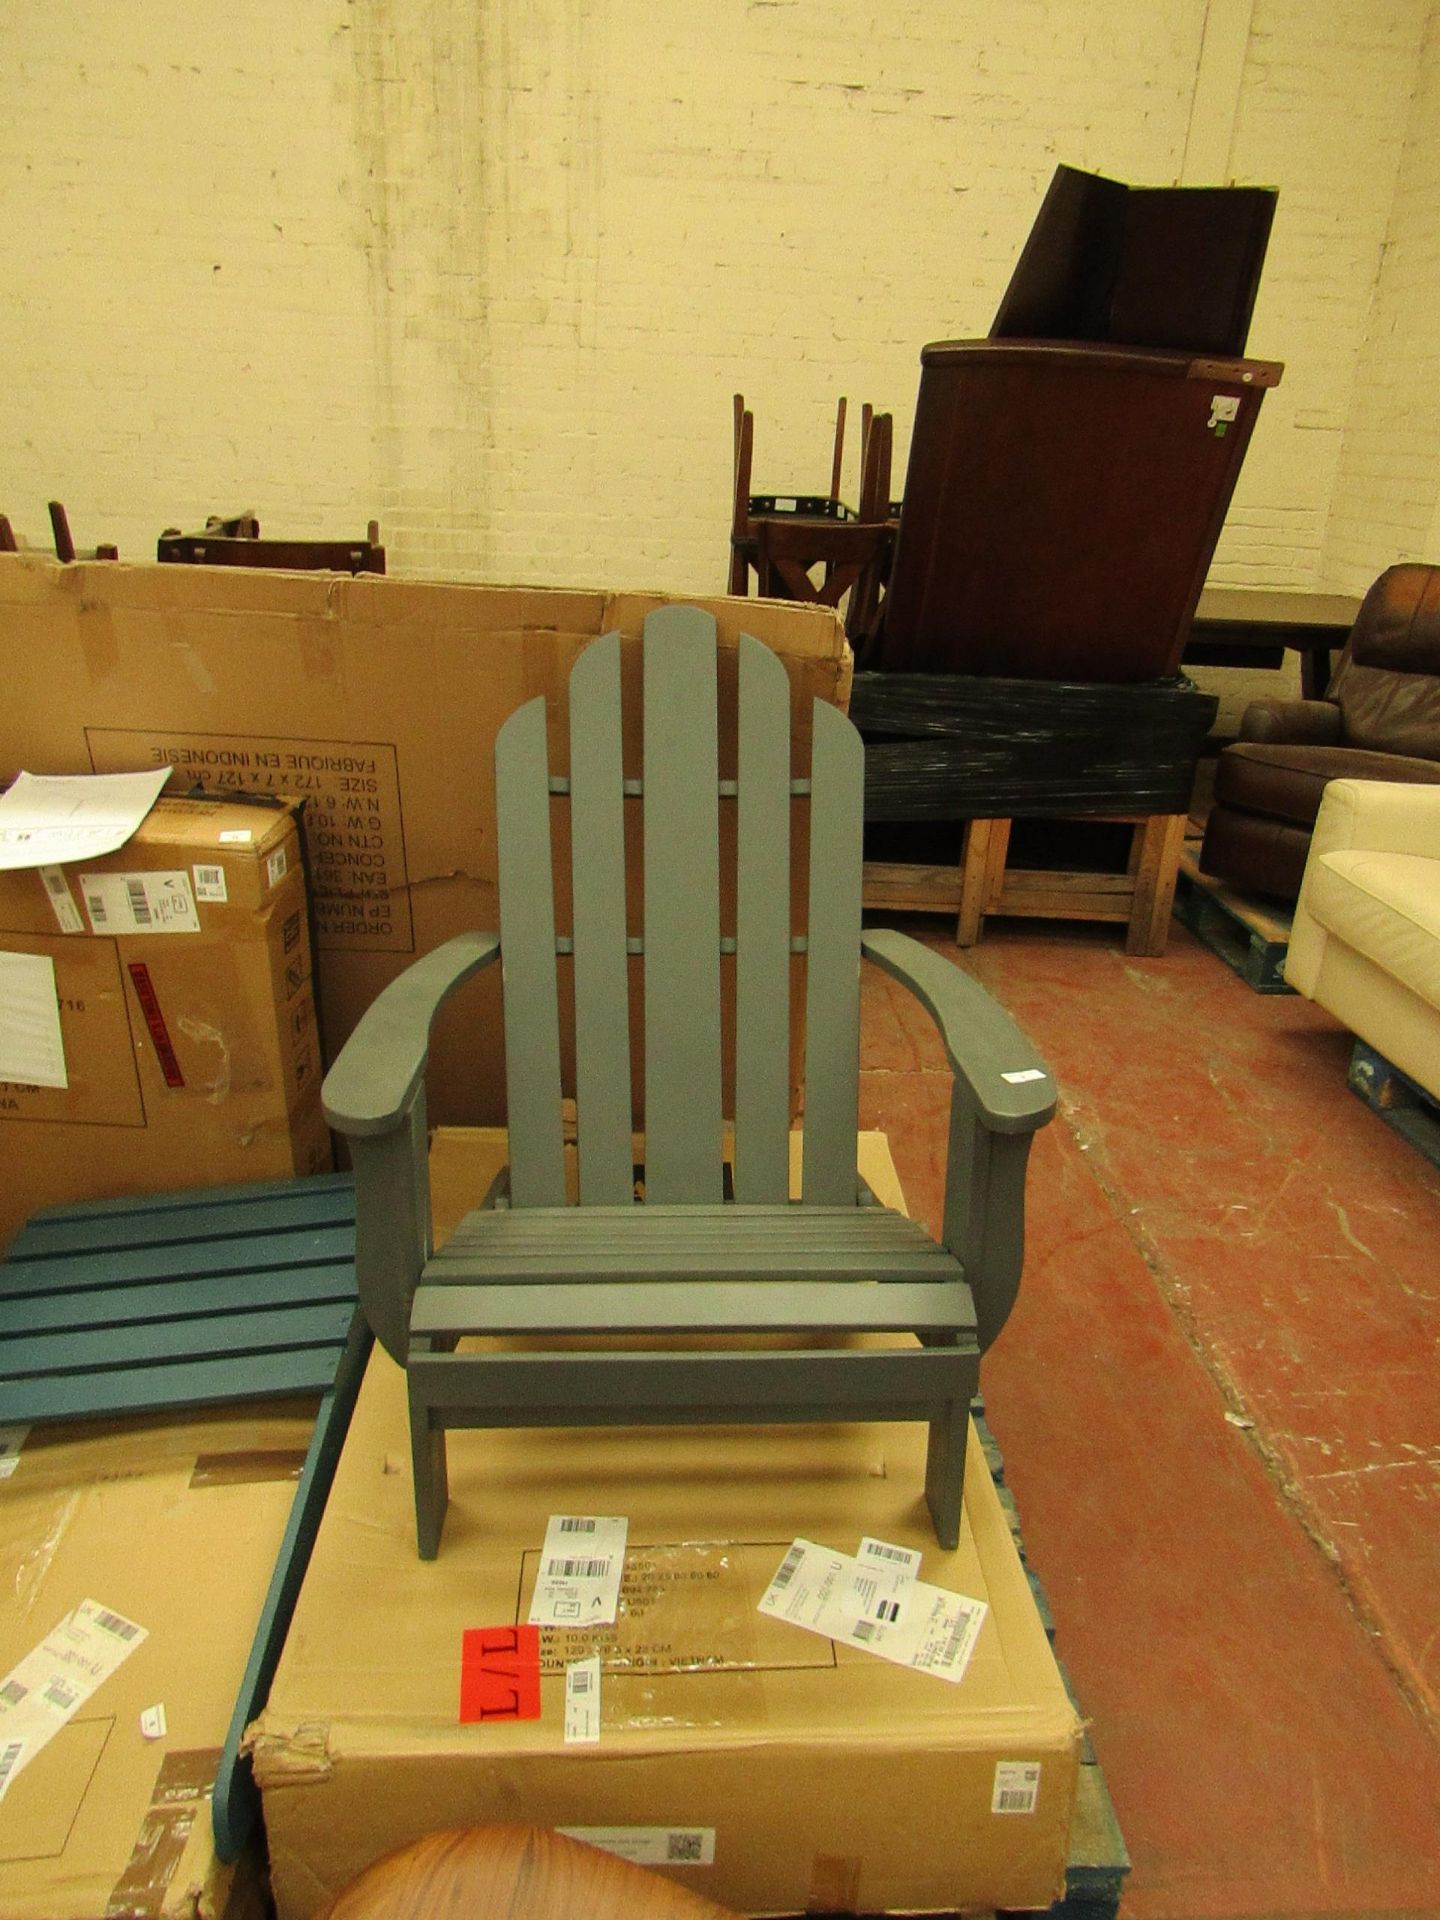 | 1X | LA REDOUTE ARONDECK STYLE GARDEN CHAIR, | LOOKS UNUSED AND COMES WITH BOXED BUT HAS A FEW